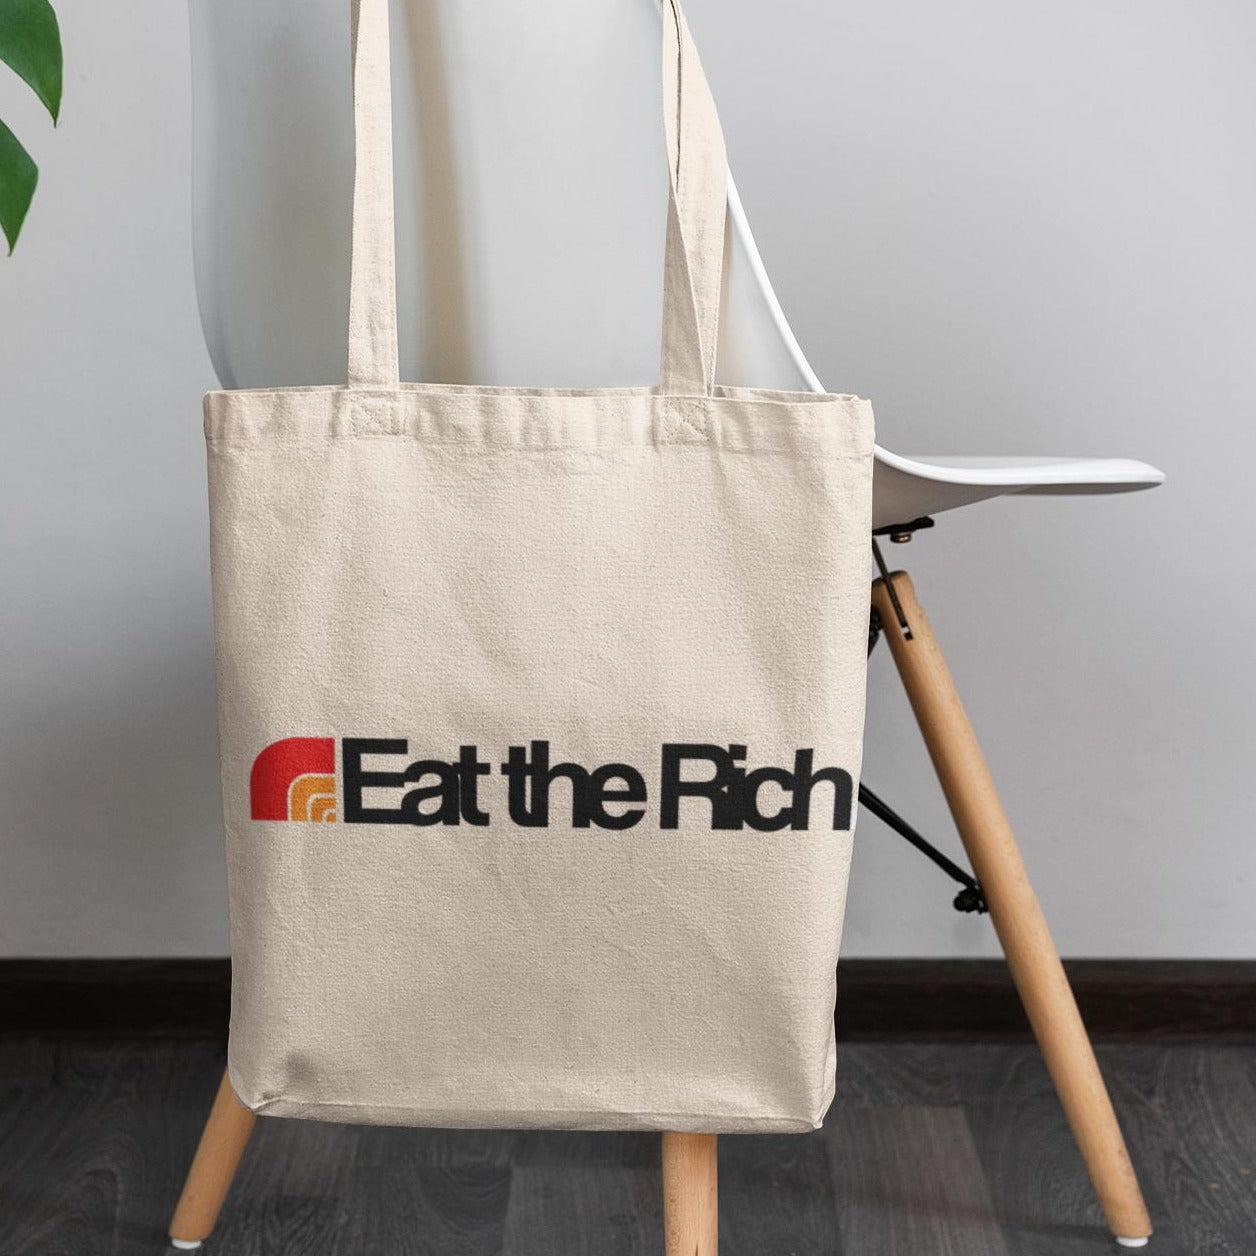 Canvas "Eat the Rich" tote bag best for use by anti-capitalists, leftists, communists, new democrats and anarchists at Billionaire owned Canadian grocery stores